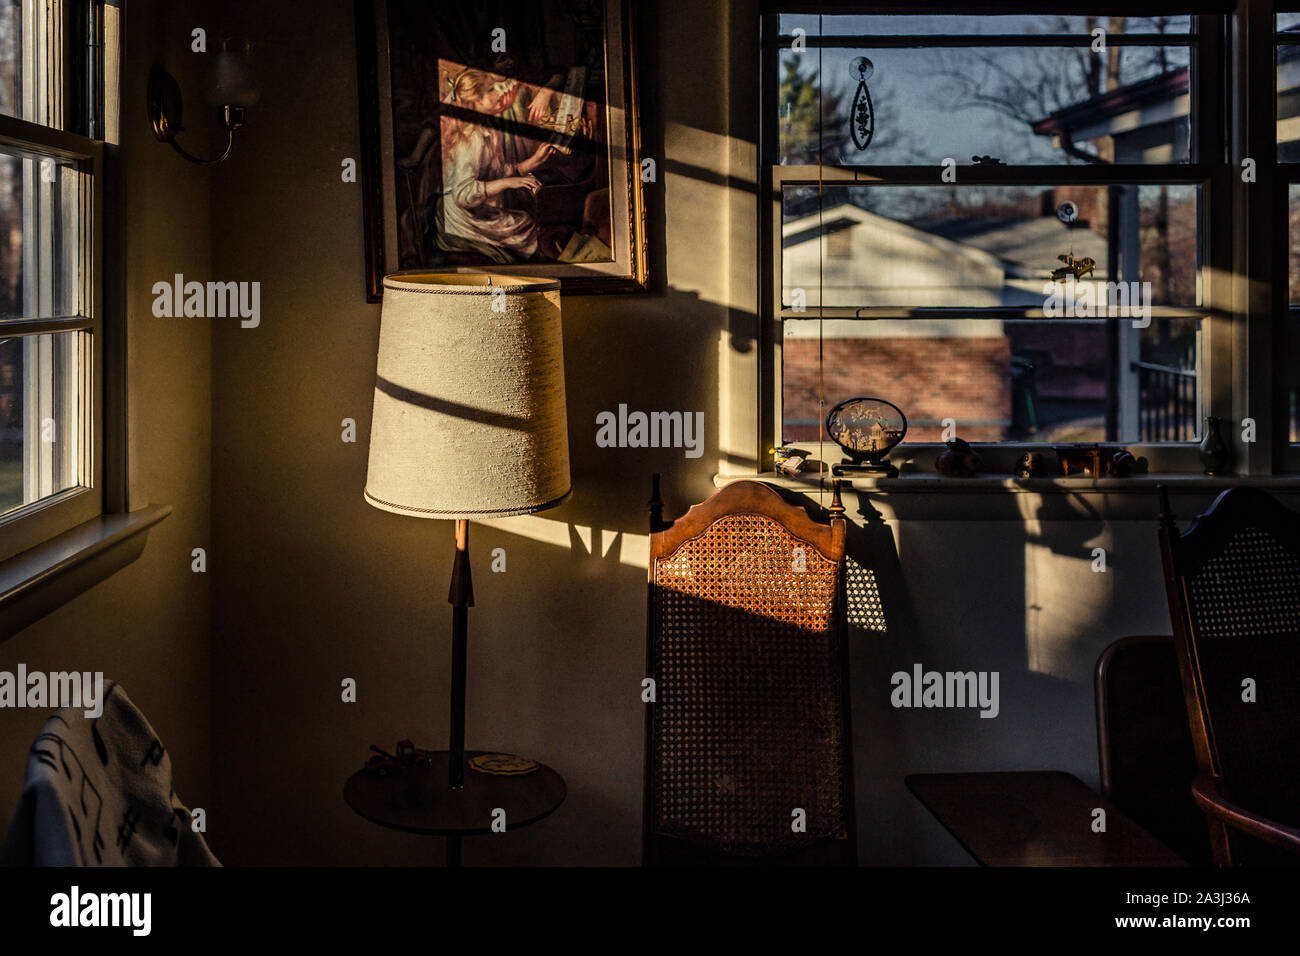 Afternoon sun casts harsh shadows in cluttered room Stock Photo